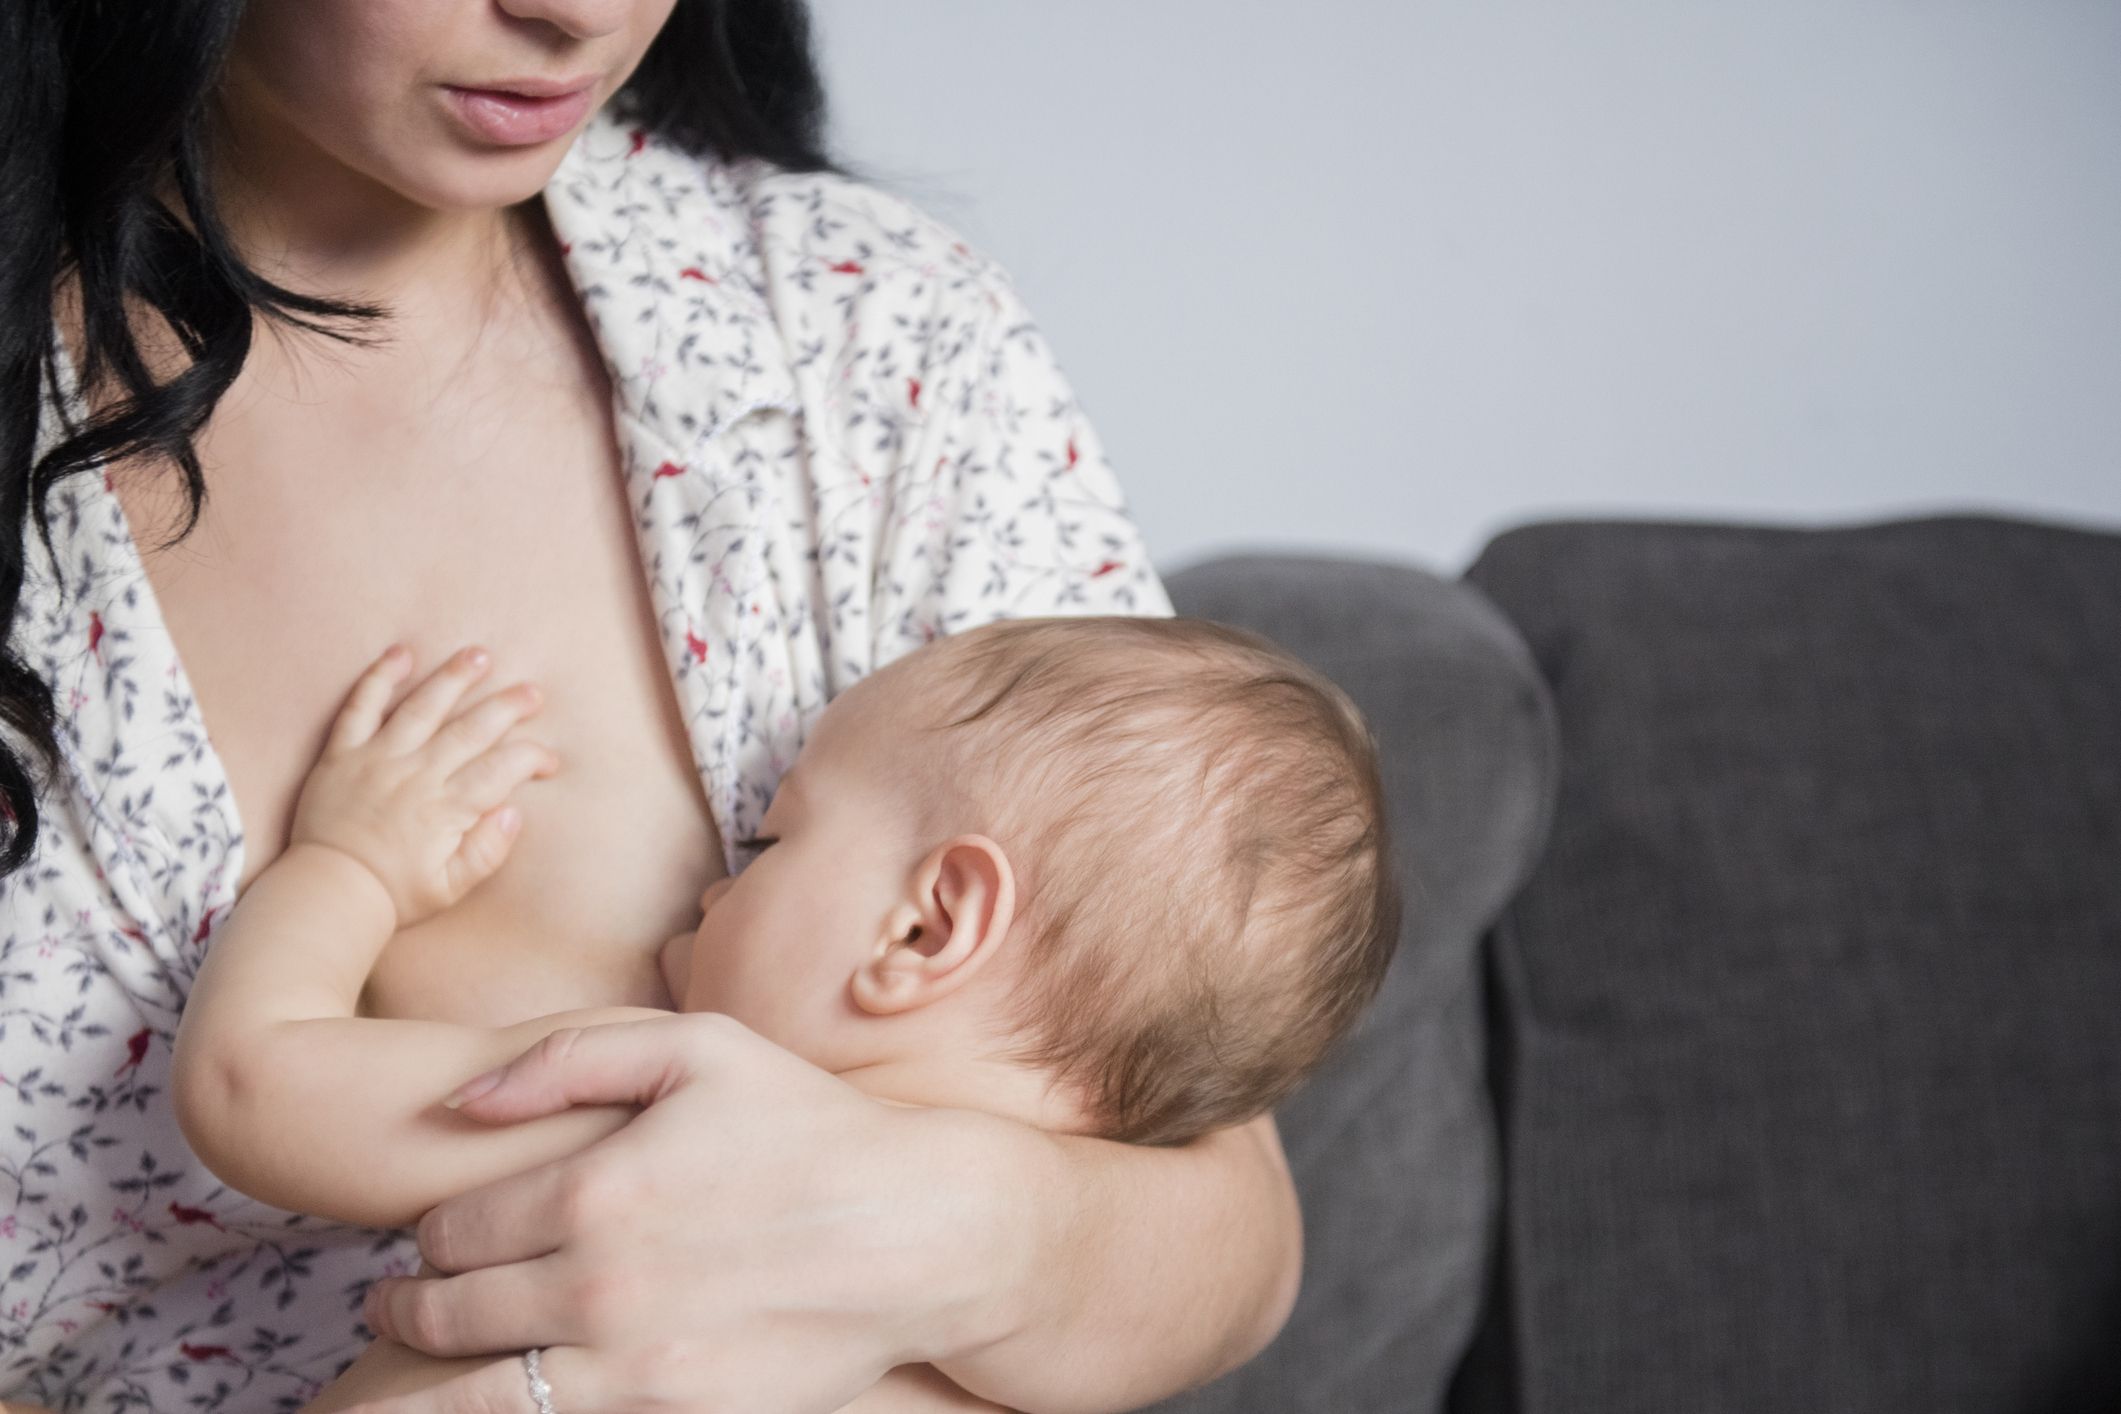 Transgender Woman Breastfeeds Baby In First Recorded Case